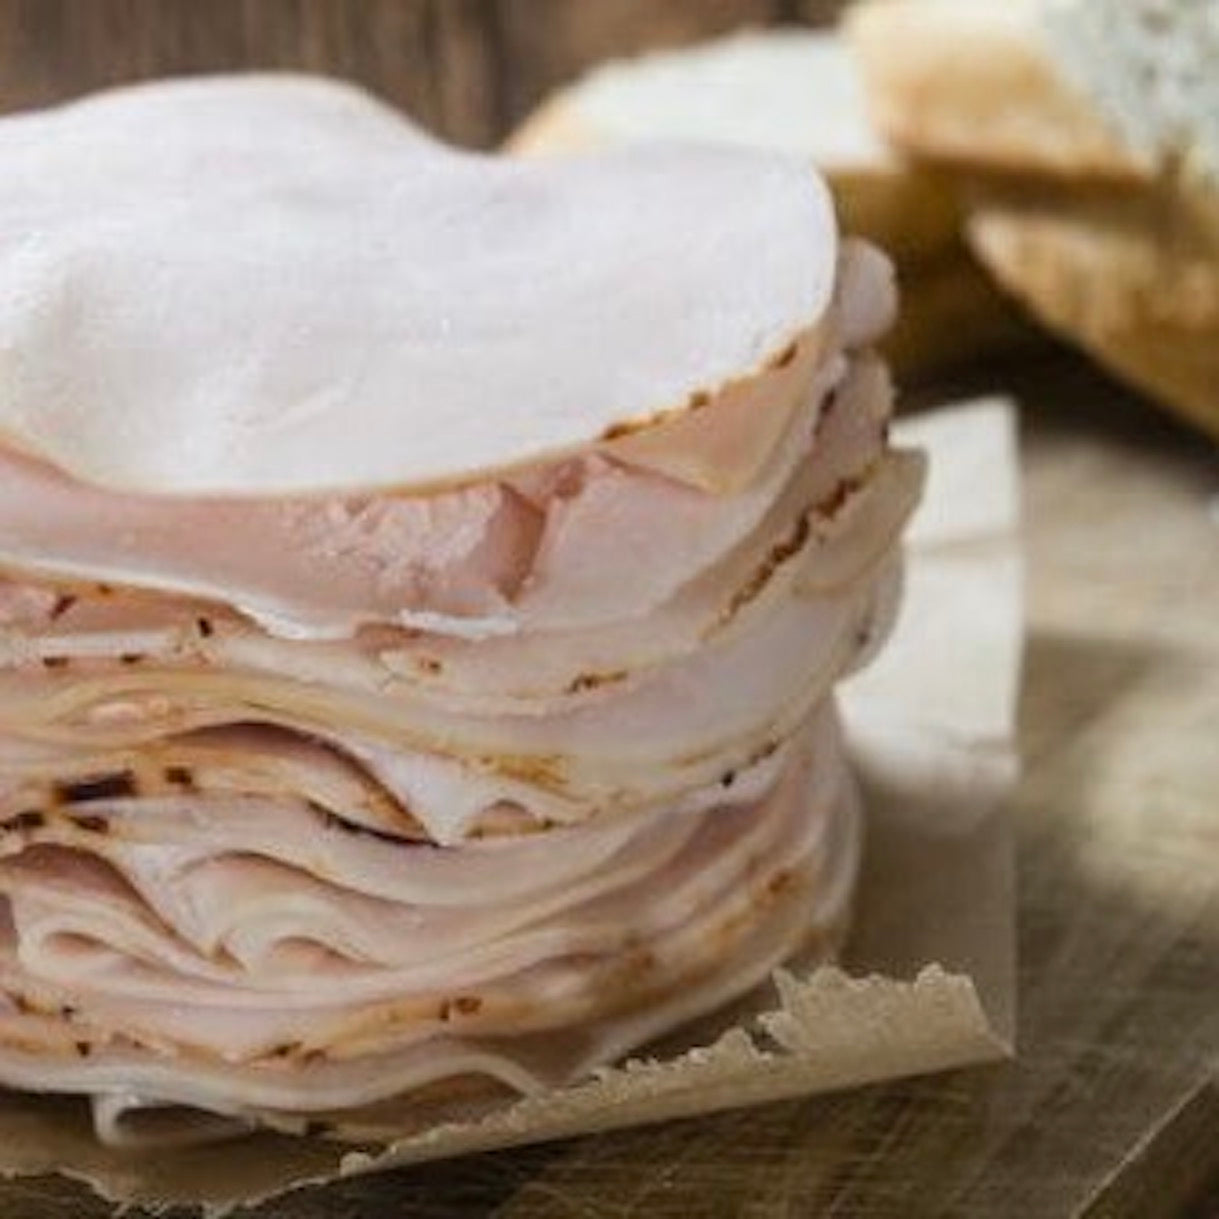 Shop Turkey Ham in Singapore - The New Grocer